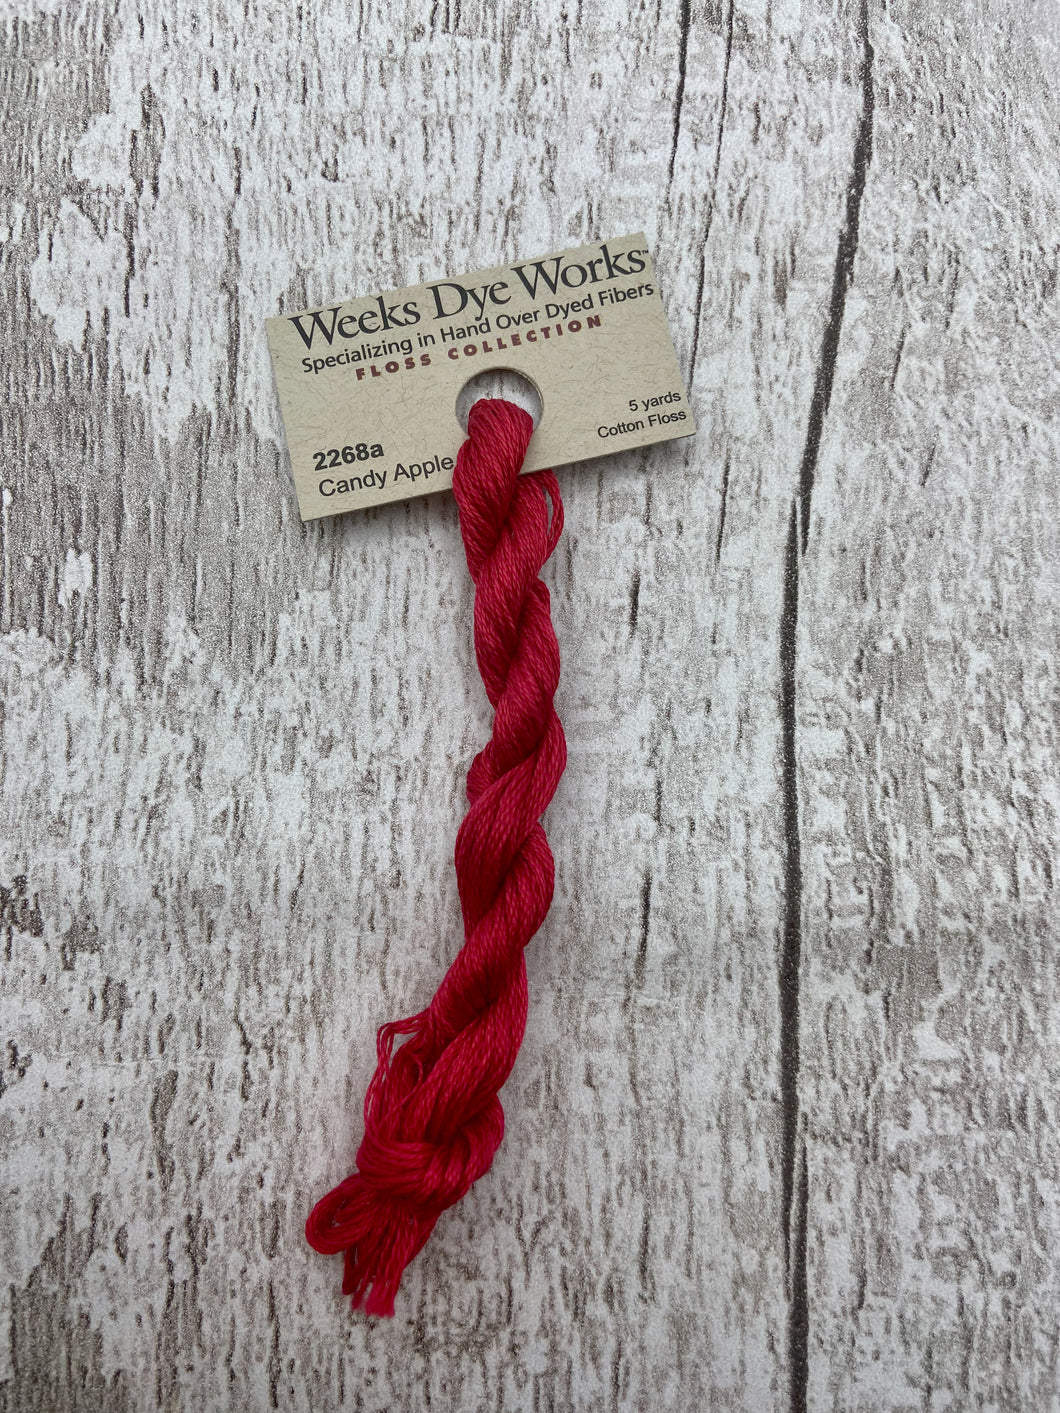 Candy Apple (#2268a) Weeks Dye Works, 6-strand cotton floss